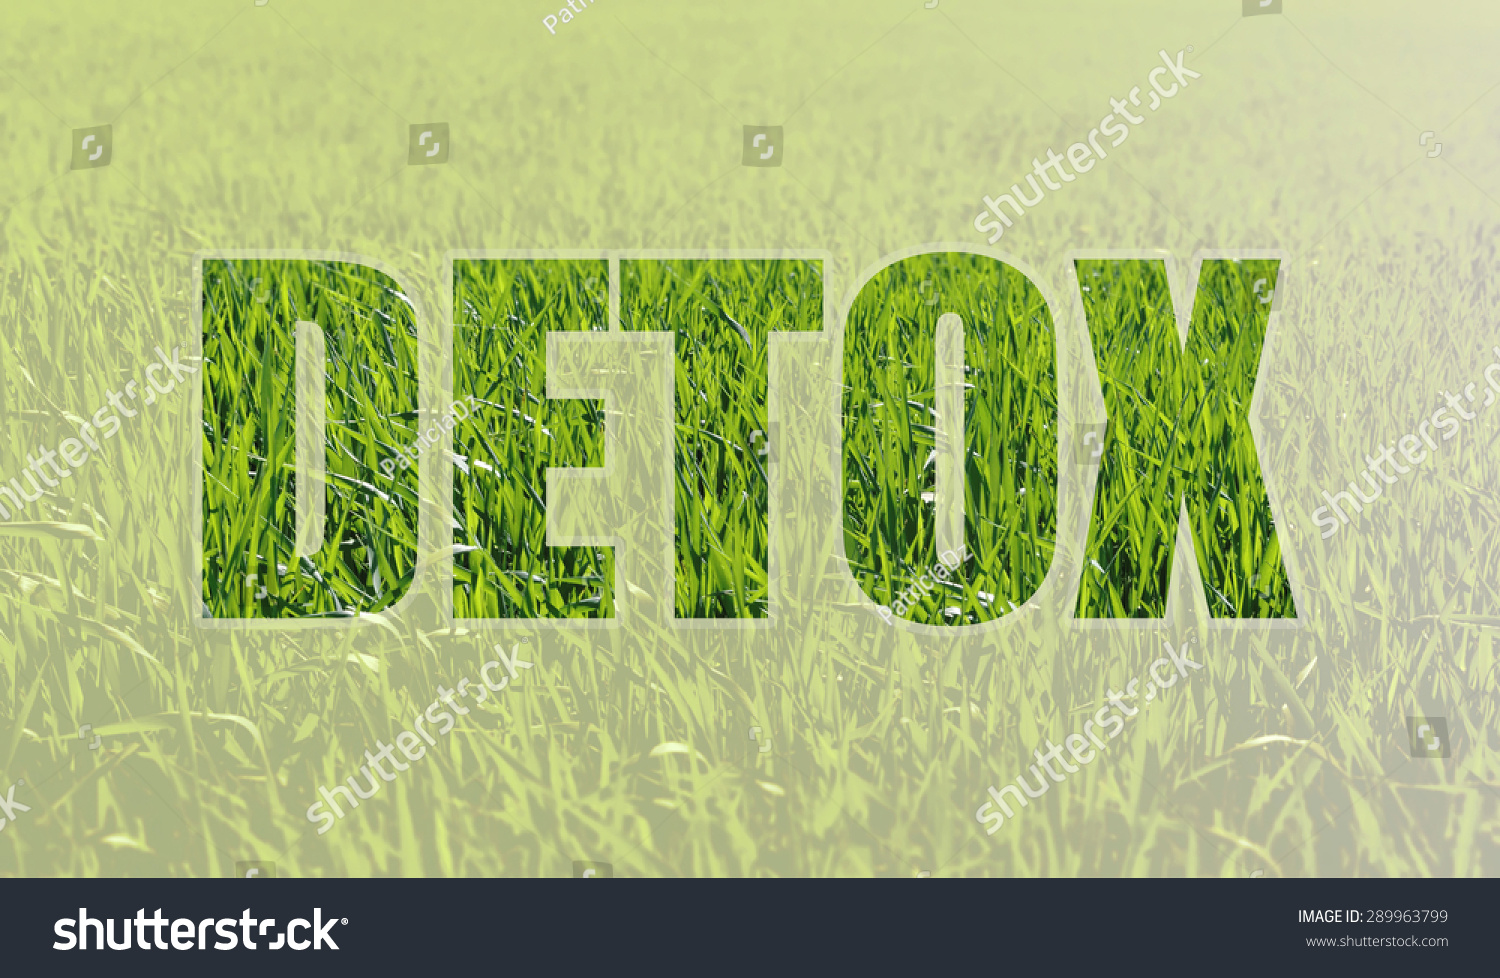 Background with fresh green grass symbolizing the rebirth and the inscription DETOX. Detoxification helps rid the body of toxins. Alternative medicine #289963799